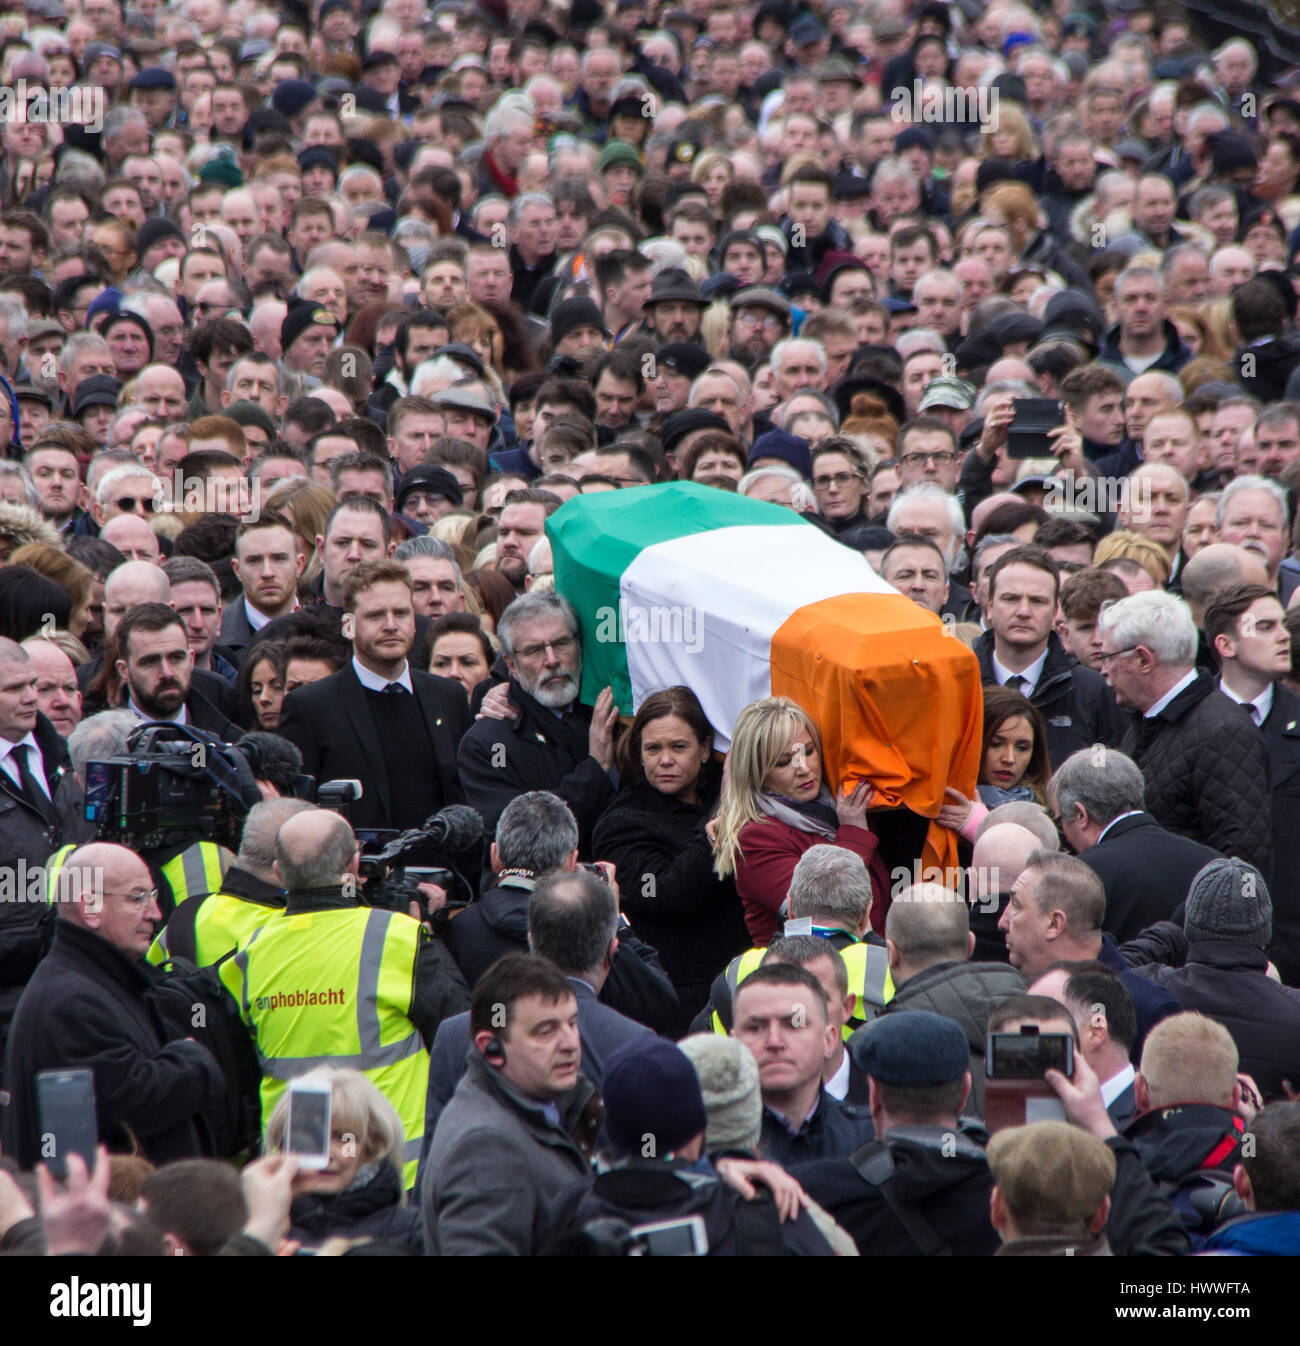 Derry, UK 23 March 2017. Gerry Adams and Michelle O'Neill carry the coffin of Martin McGuinness through the Bogside in Derry. Photo by Mickey Rooney/Alamy Live News.  Stock Photo